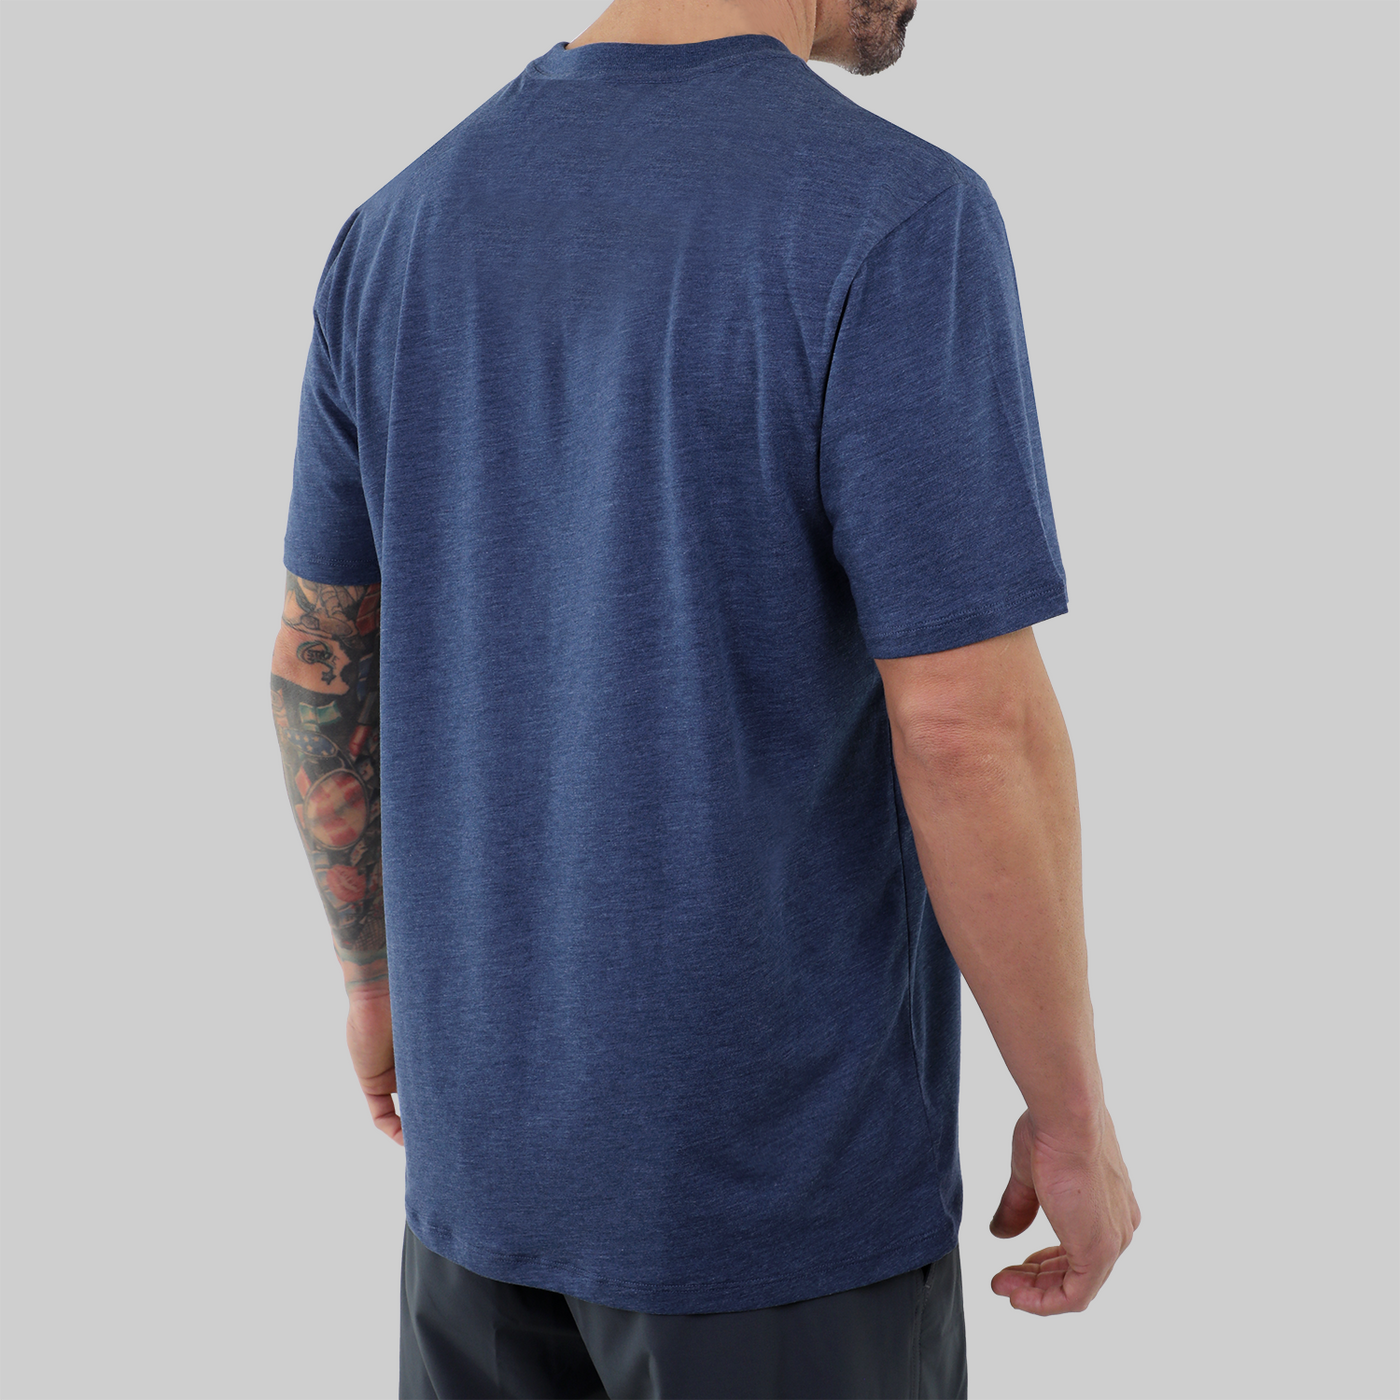 All Day Crew Tee - Space Golf Navy